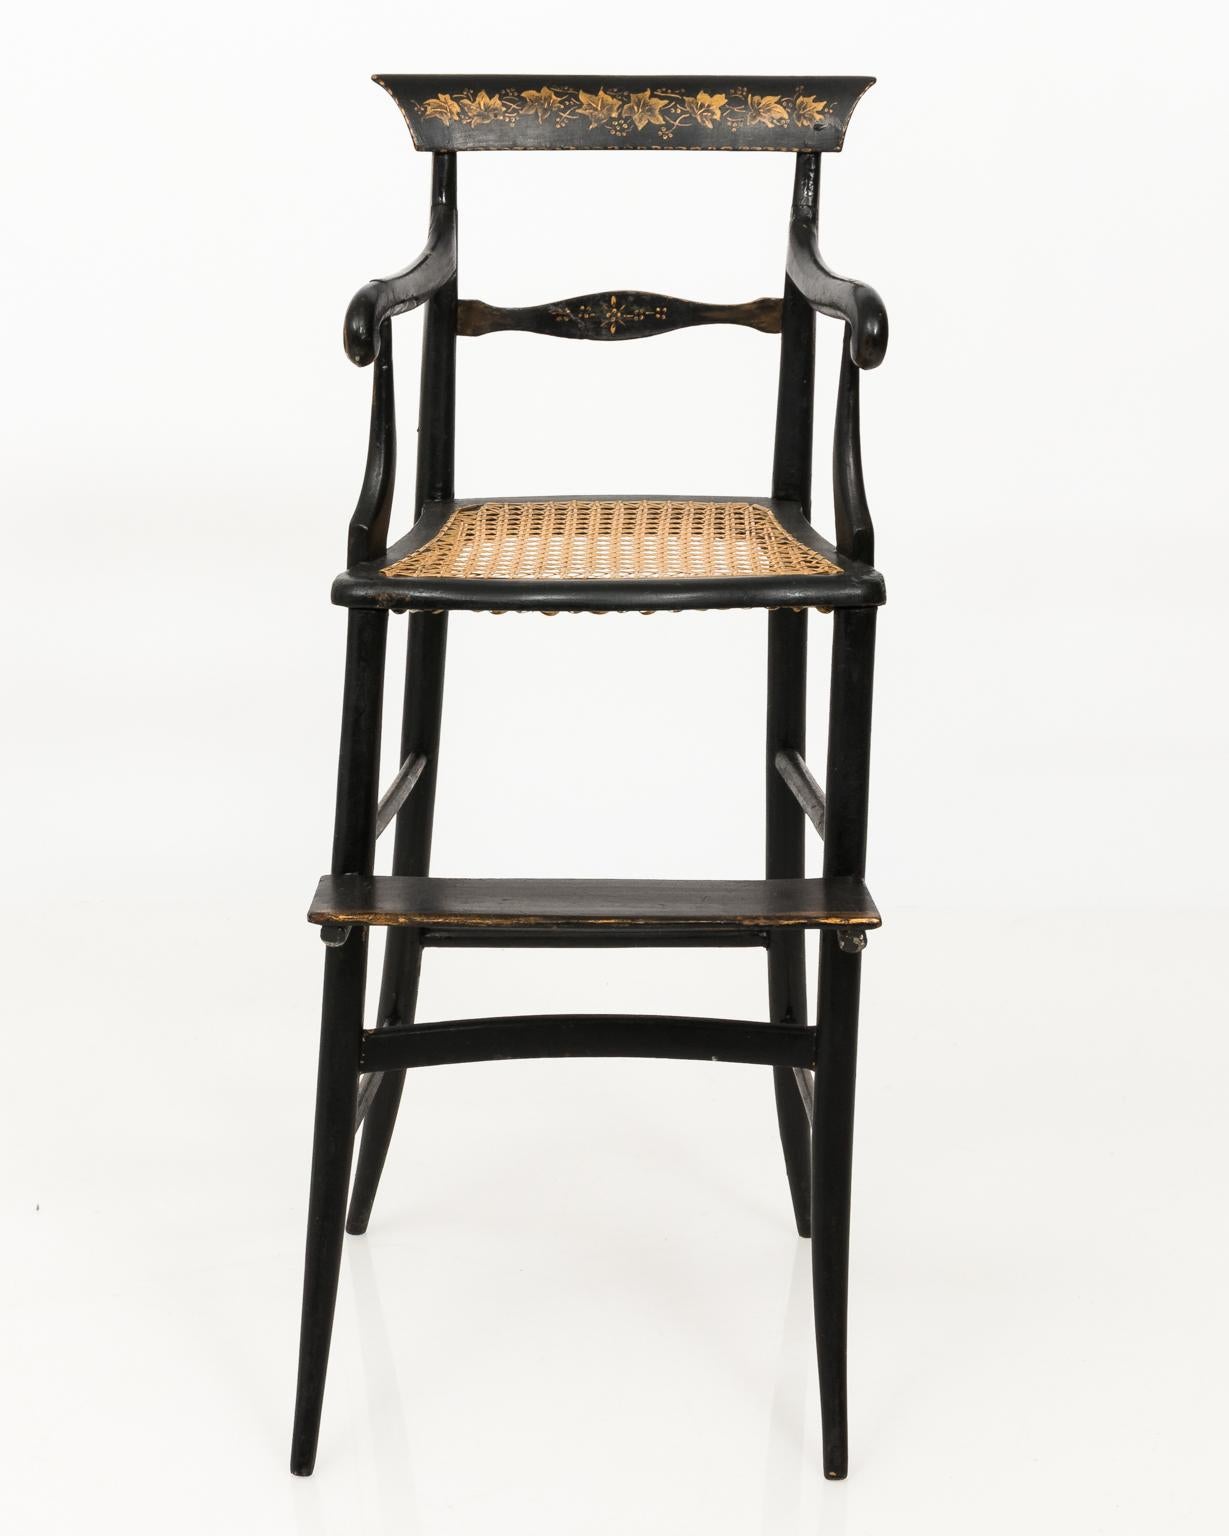 Cane 19th Century Black Painted Child's High Chair